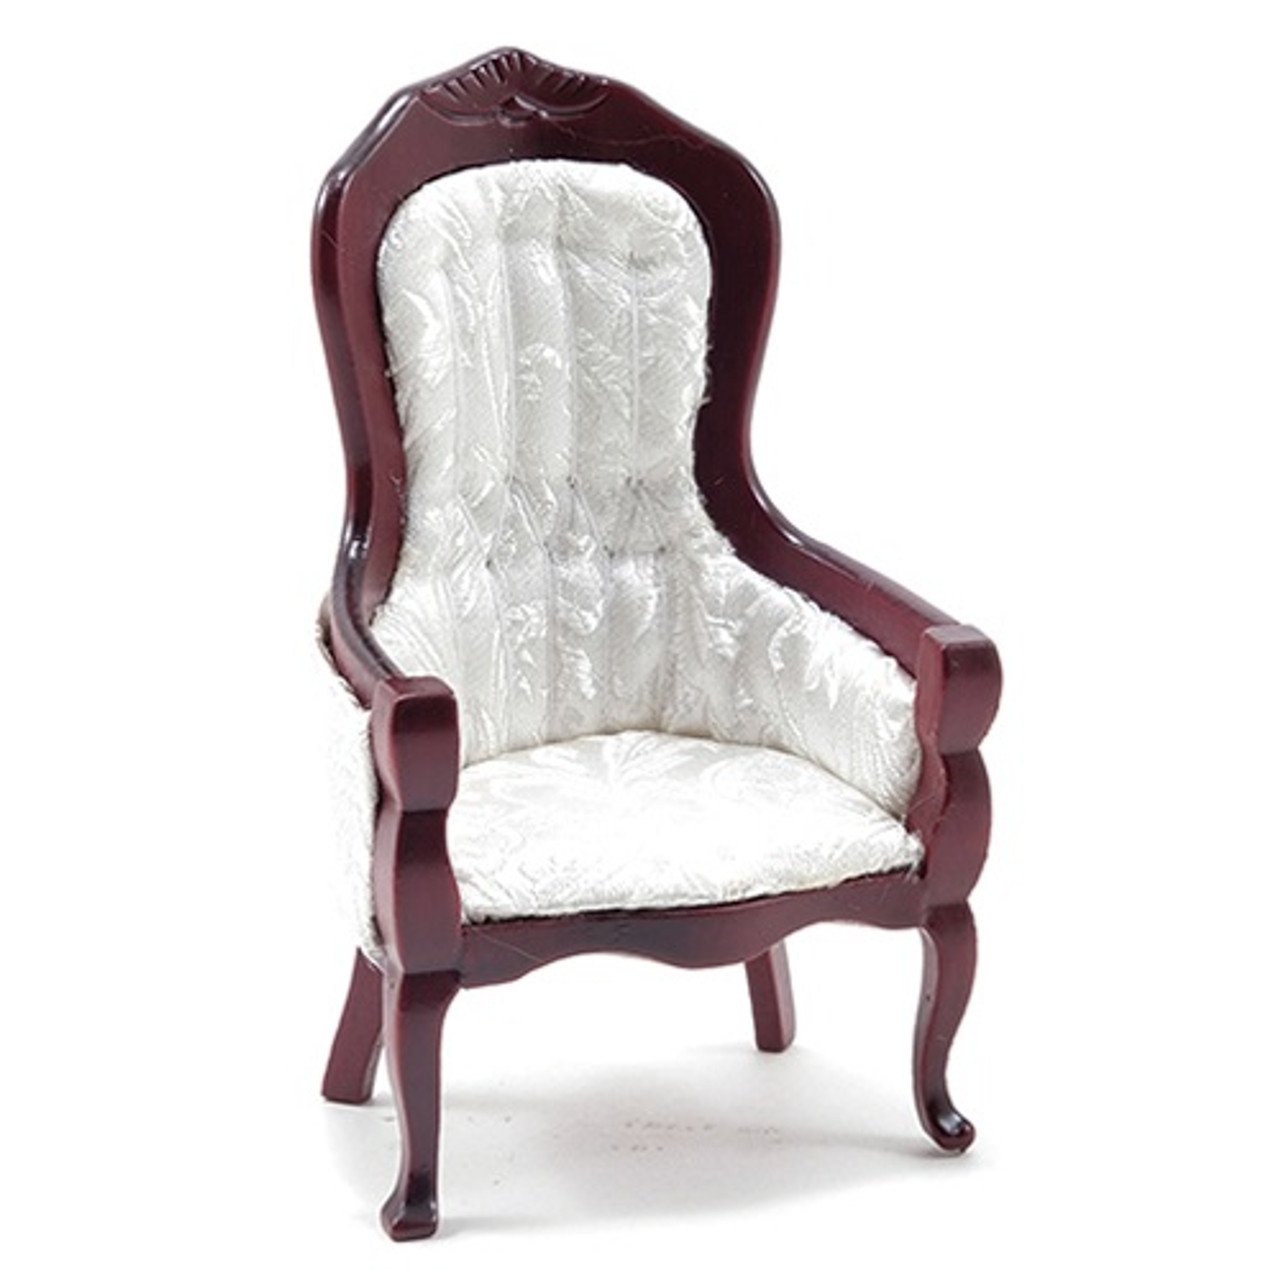 CLA10699 - One-inch (1:12) Scale Dollhouse Miniature Victorian Gent's Chair, Mahogany with White Brocade Fabric